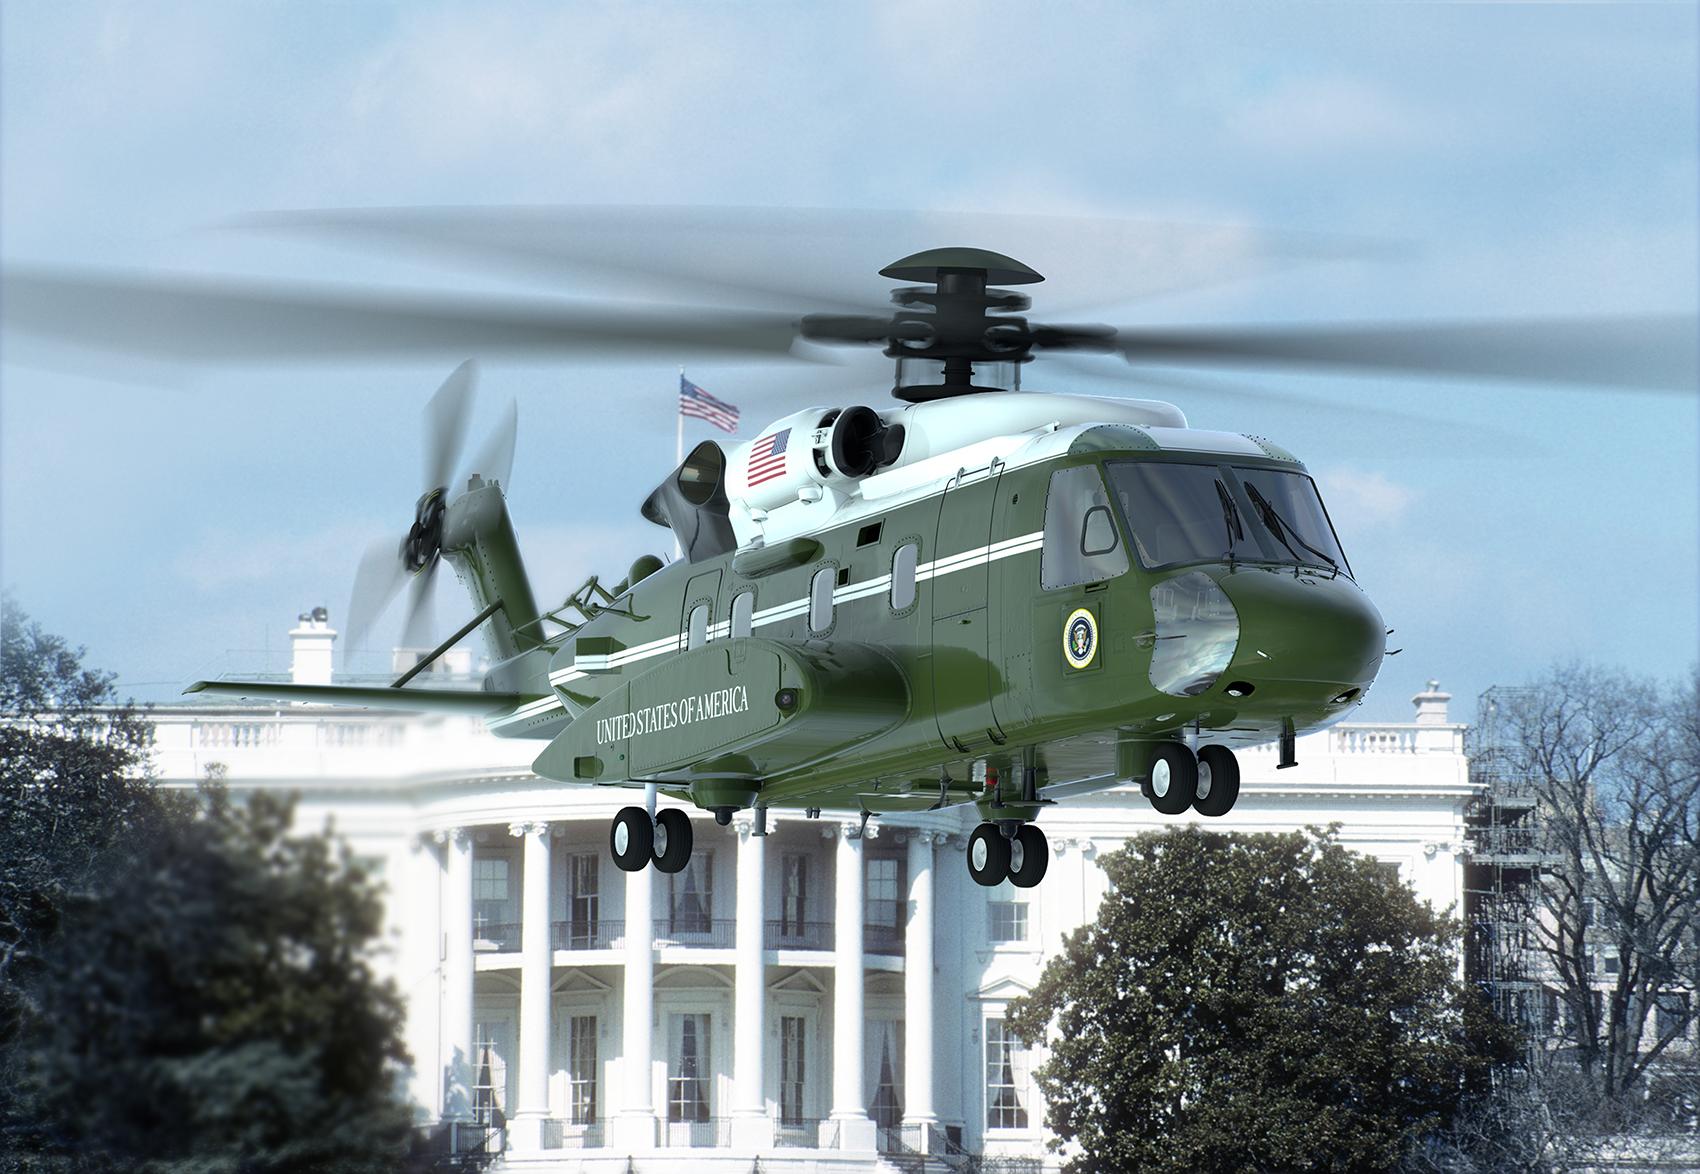 Government Accountability Office Sees Possible Delays in VH-92A Presidential Helicopter